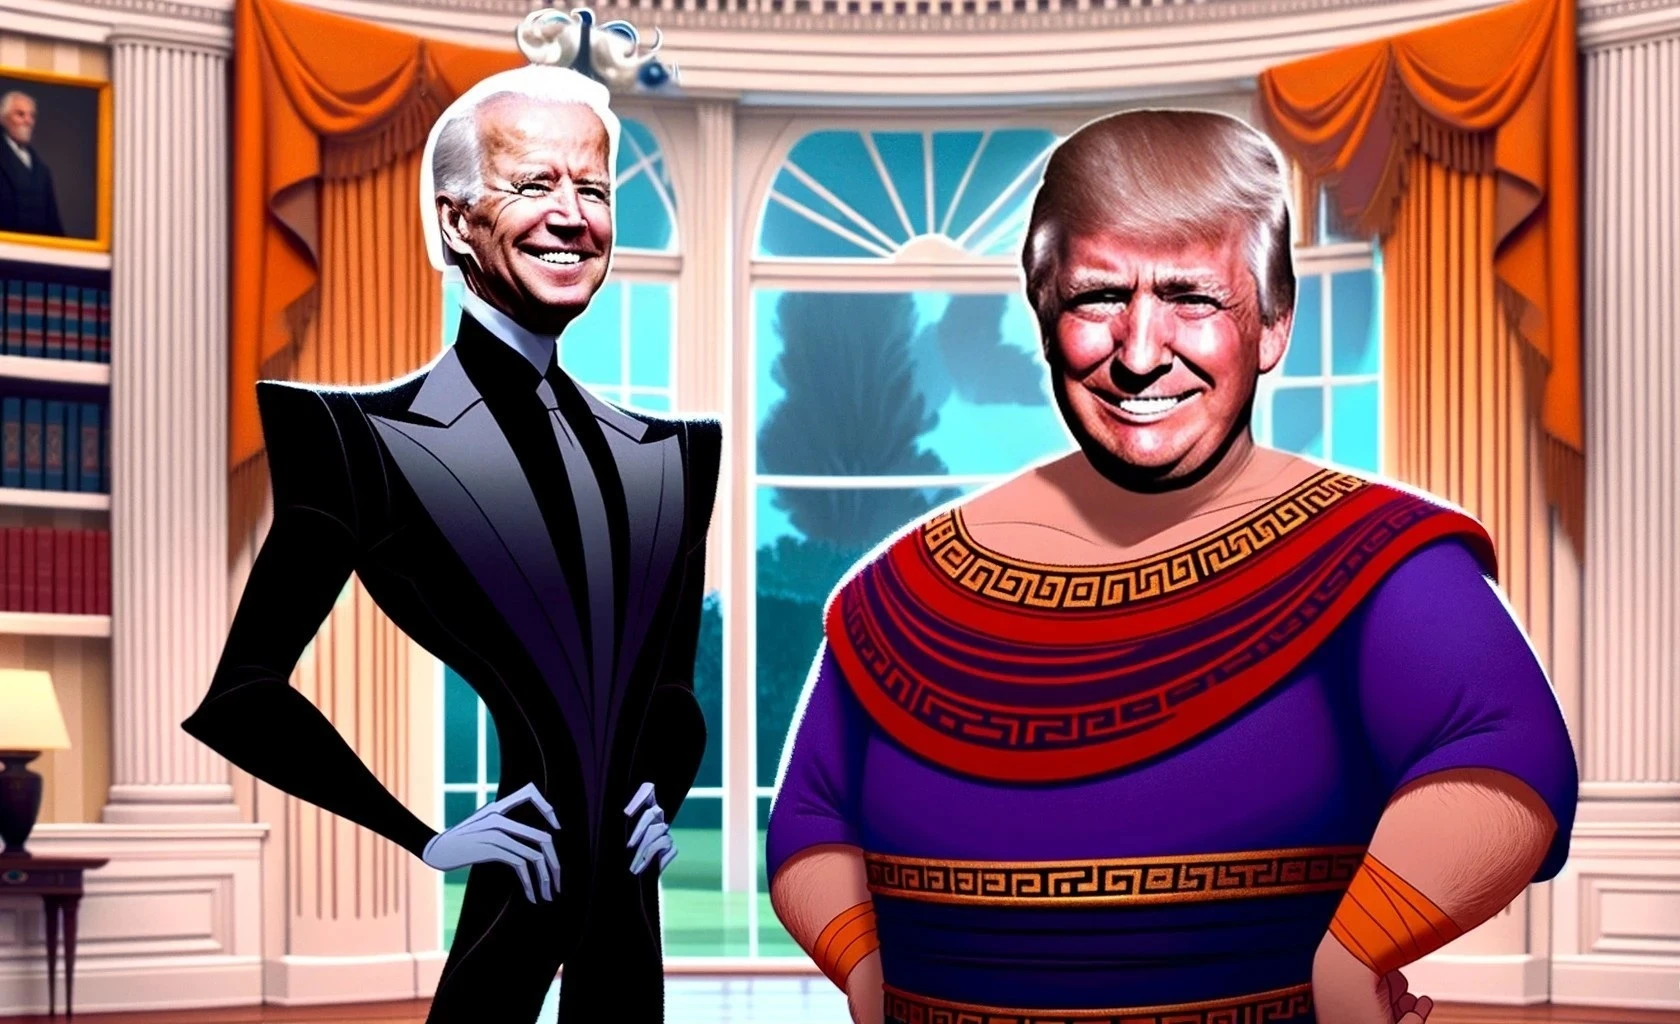 Joe Biden and Donald Trump as animated characters in the Oval Office at the White House.